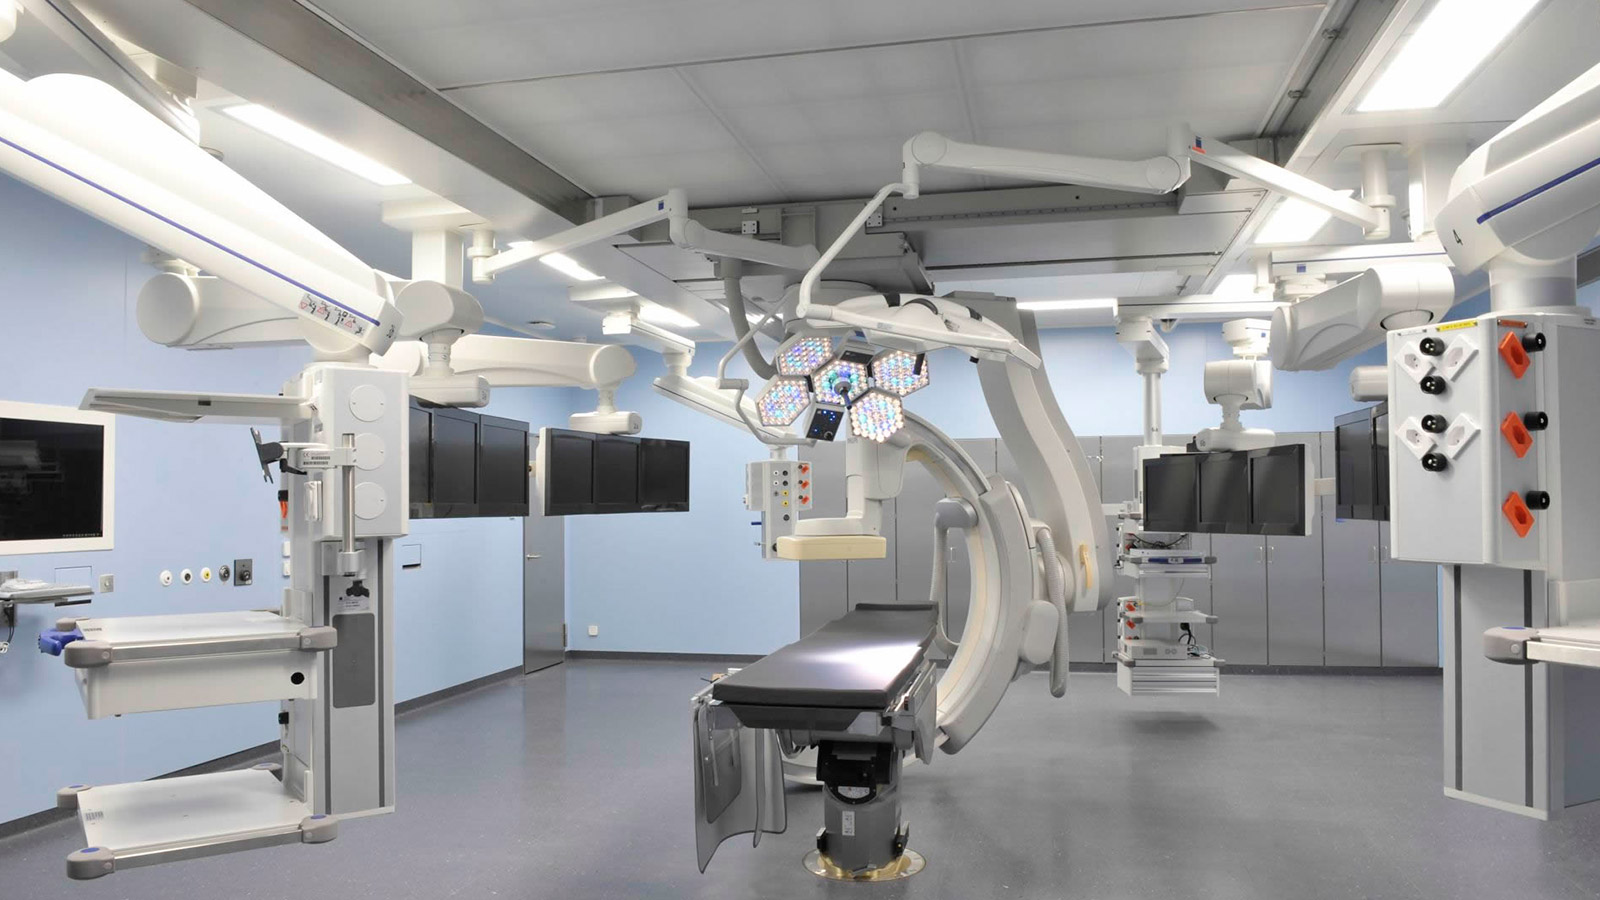 Photo of the angiography unit in the operating room